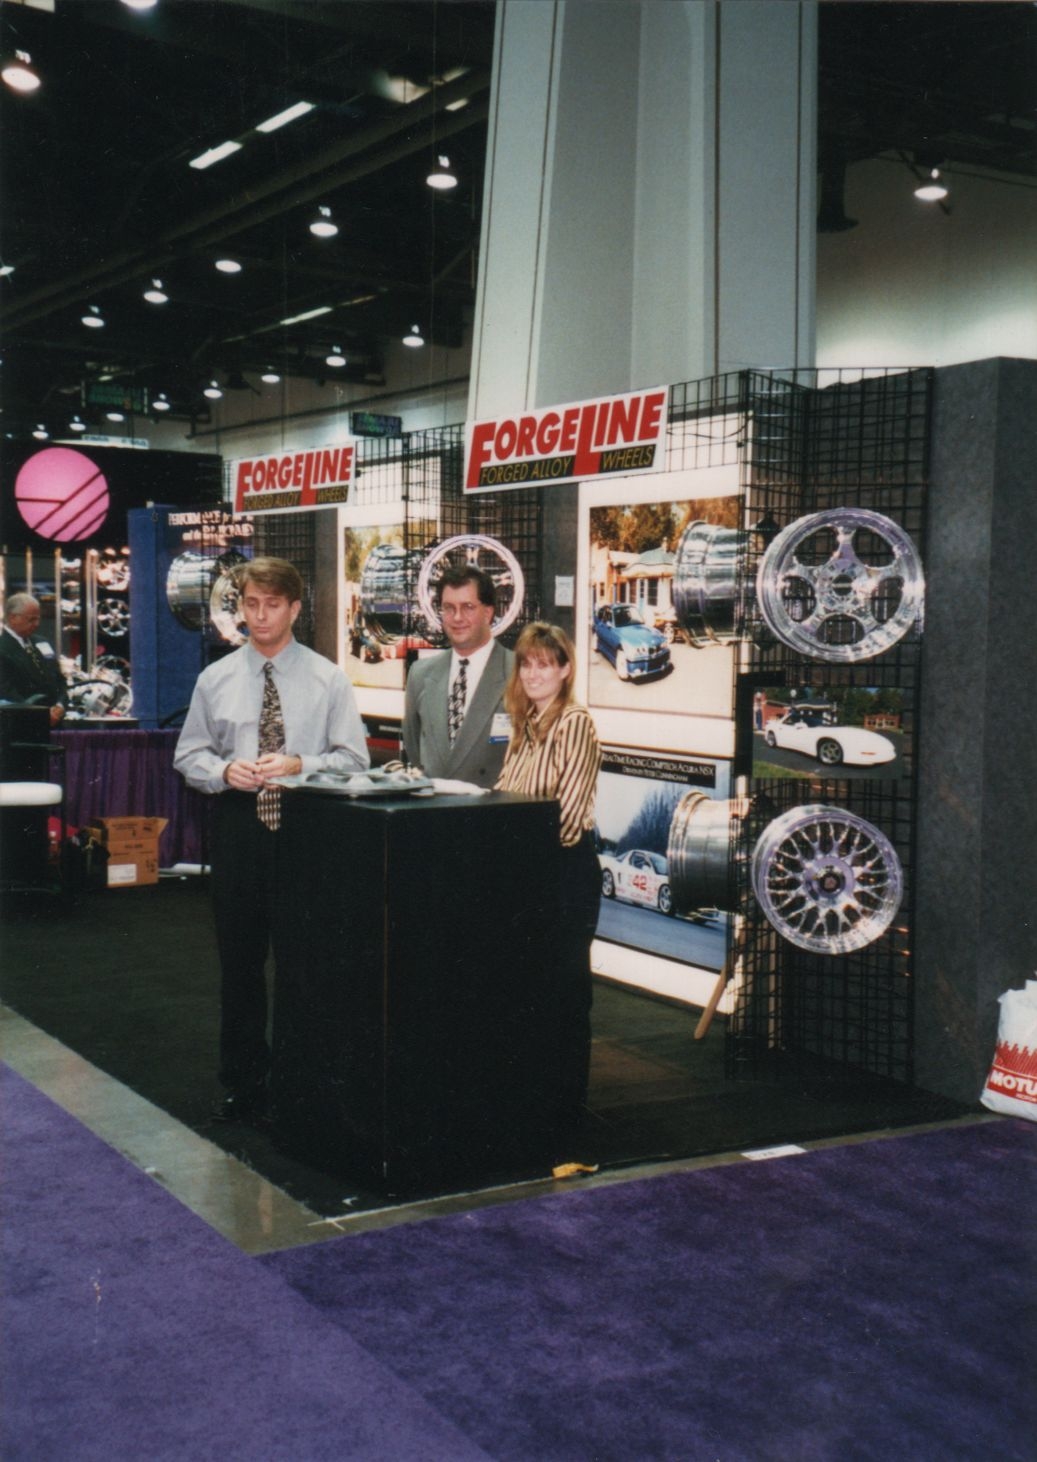 The Forgeline booth at the company's first SEMA in 1997. From left to right: Dave Schardt, Steve Shardt and Dave's wife Sherri S